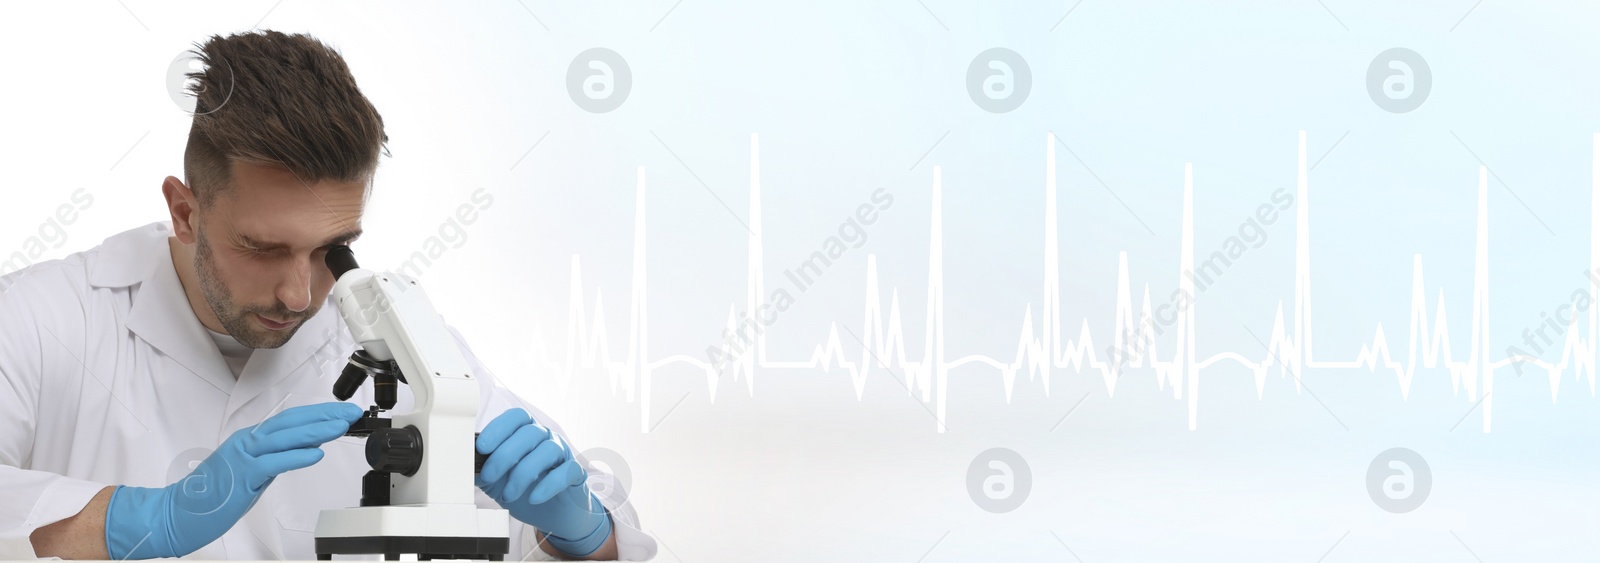 Image of Laboratory assistant using microscope on white background. Health care worker